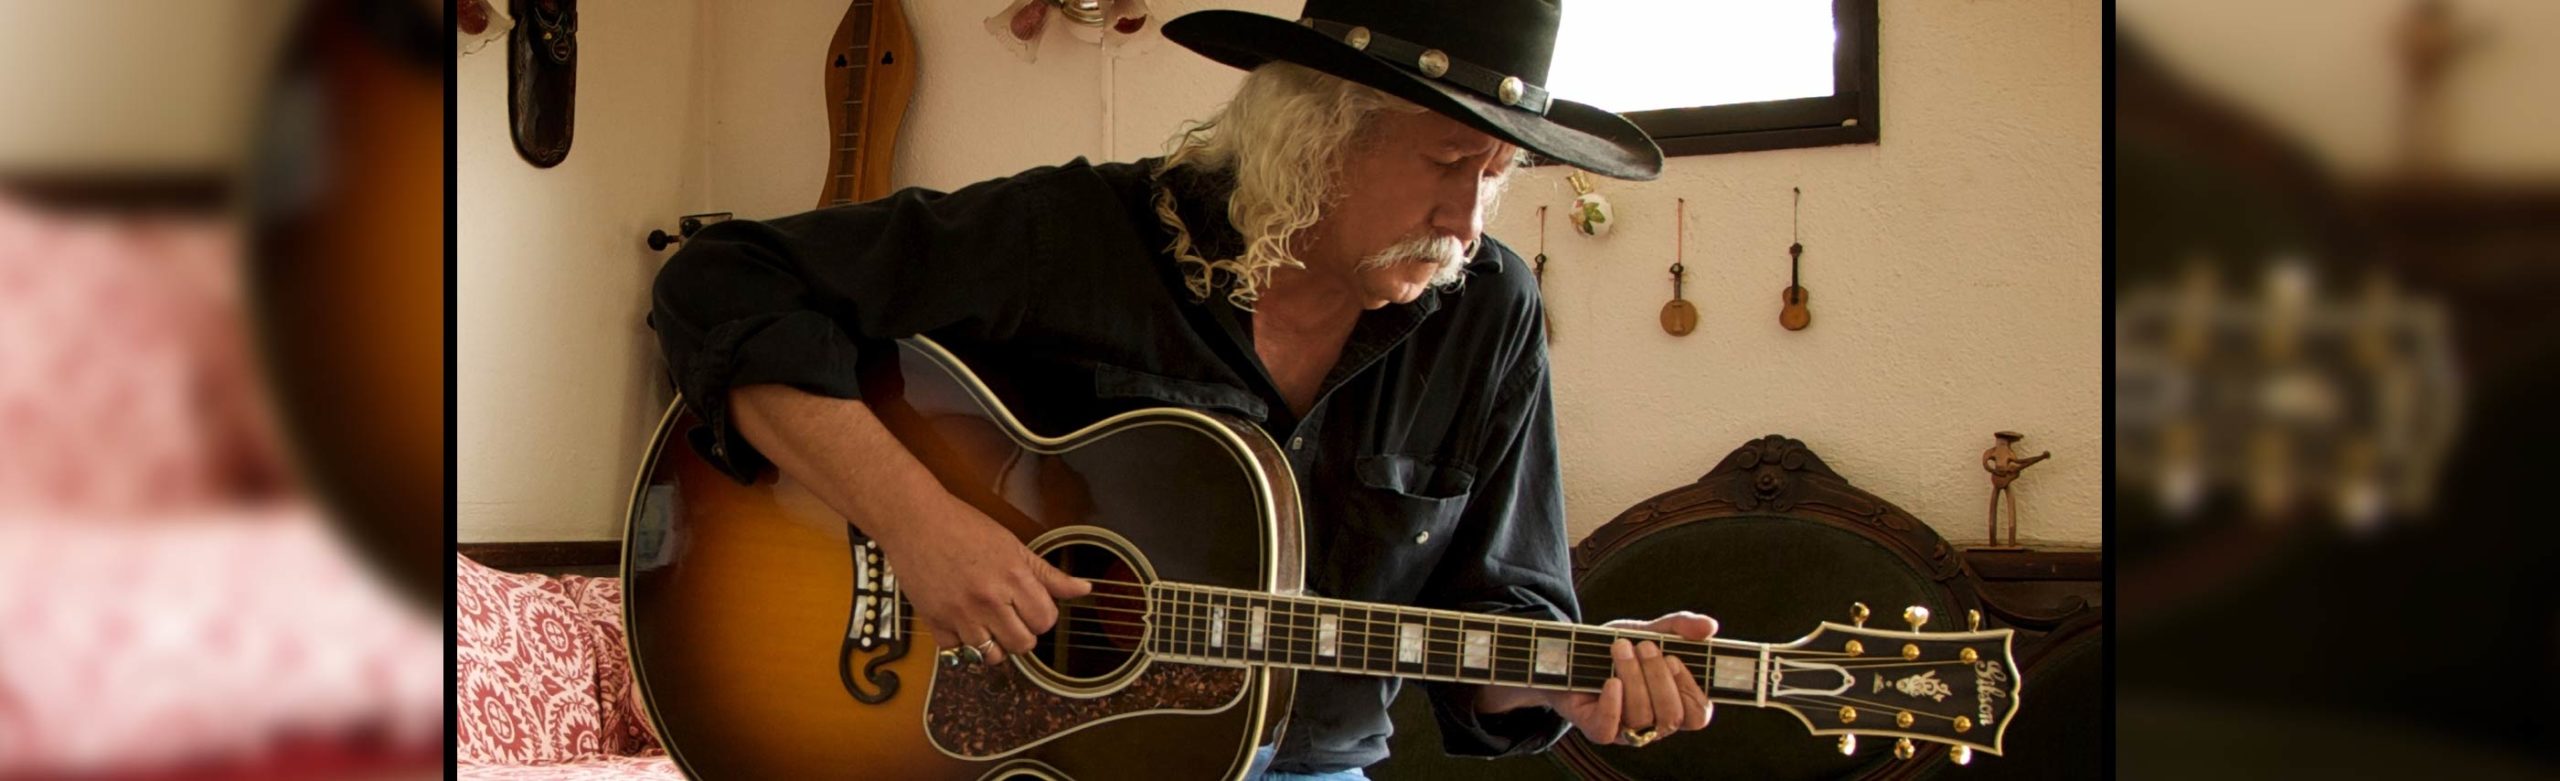 From Woodstock to The Wilma: Iconic Folk Artist Arlo Guthrie Will Perform in Missoula Image